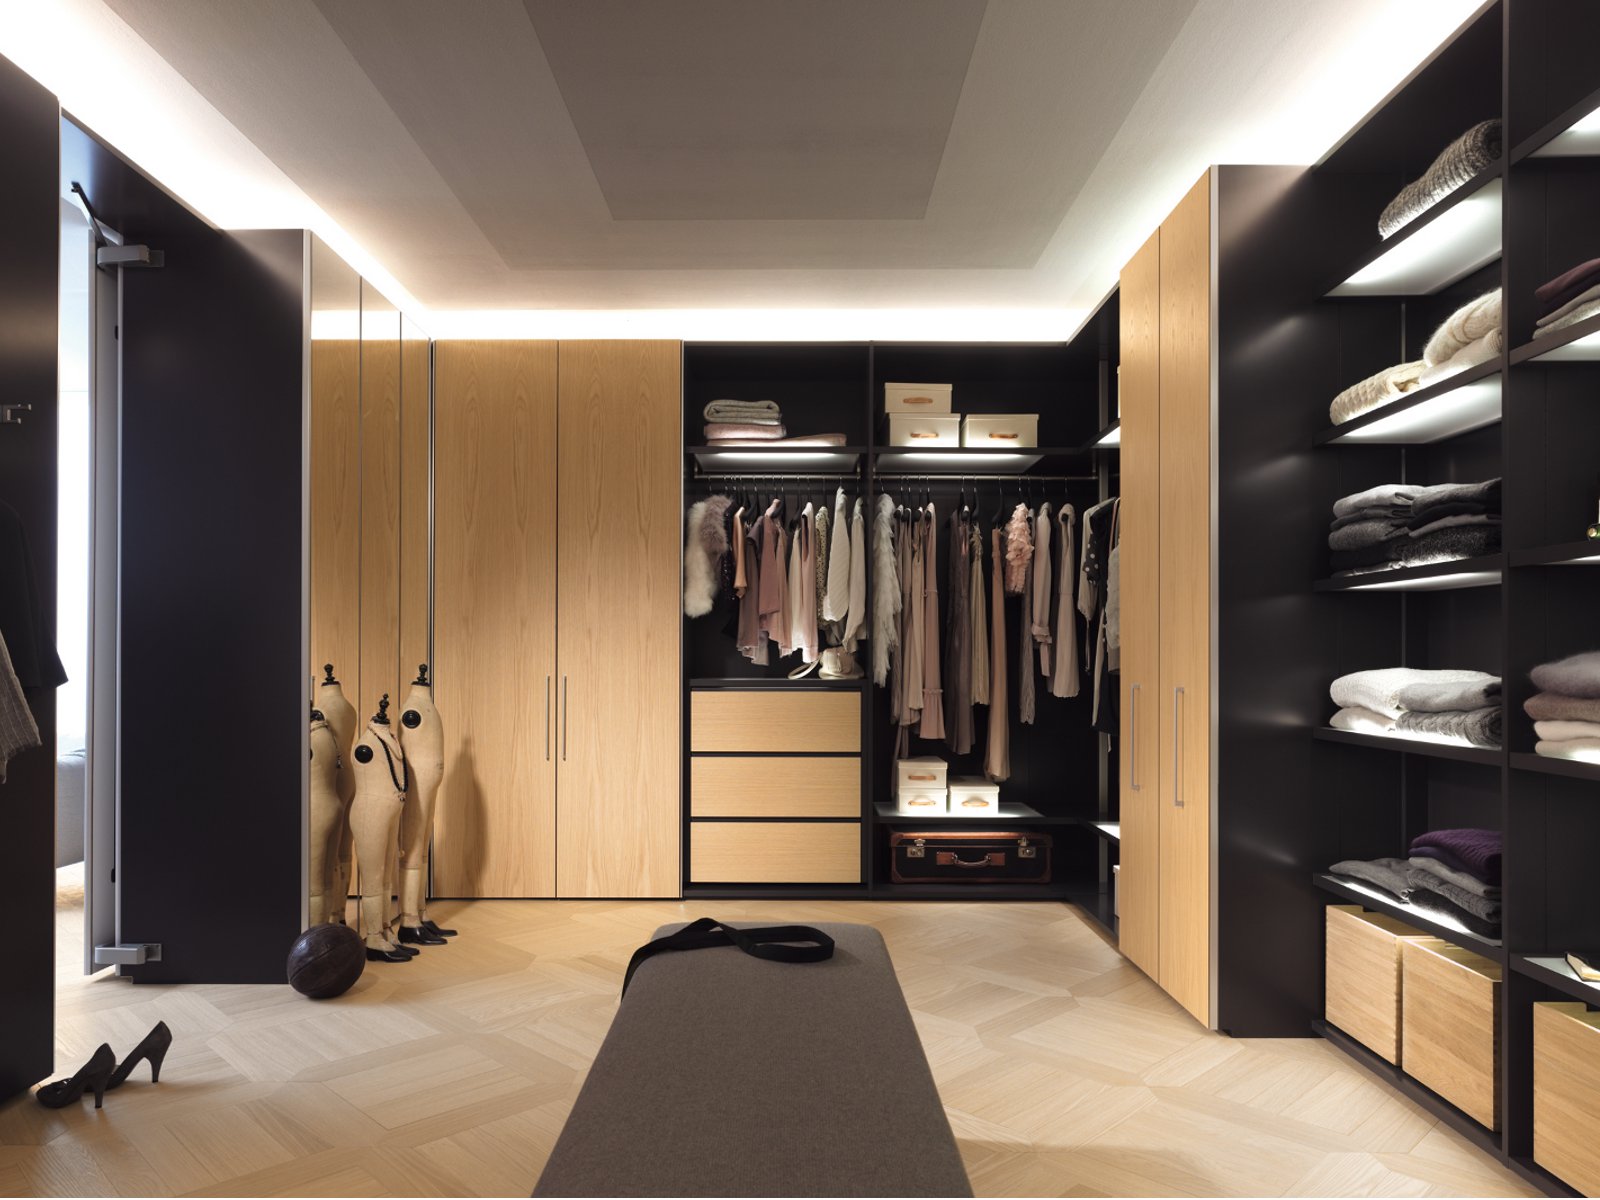 furniture-really-cool-walk-in-closet-dimensions-for-modern-bedroom-decorations-plans-with-long-stool-and-wooden-wardrobe-doors-with-stylish-shelving-and-amazing-ceiling-decor-walkin-closet.jpg